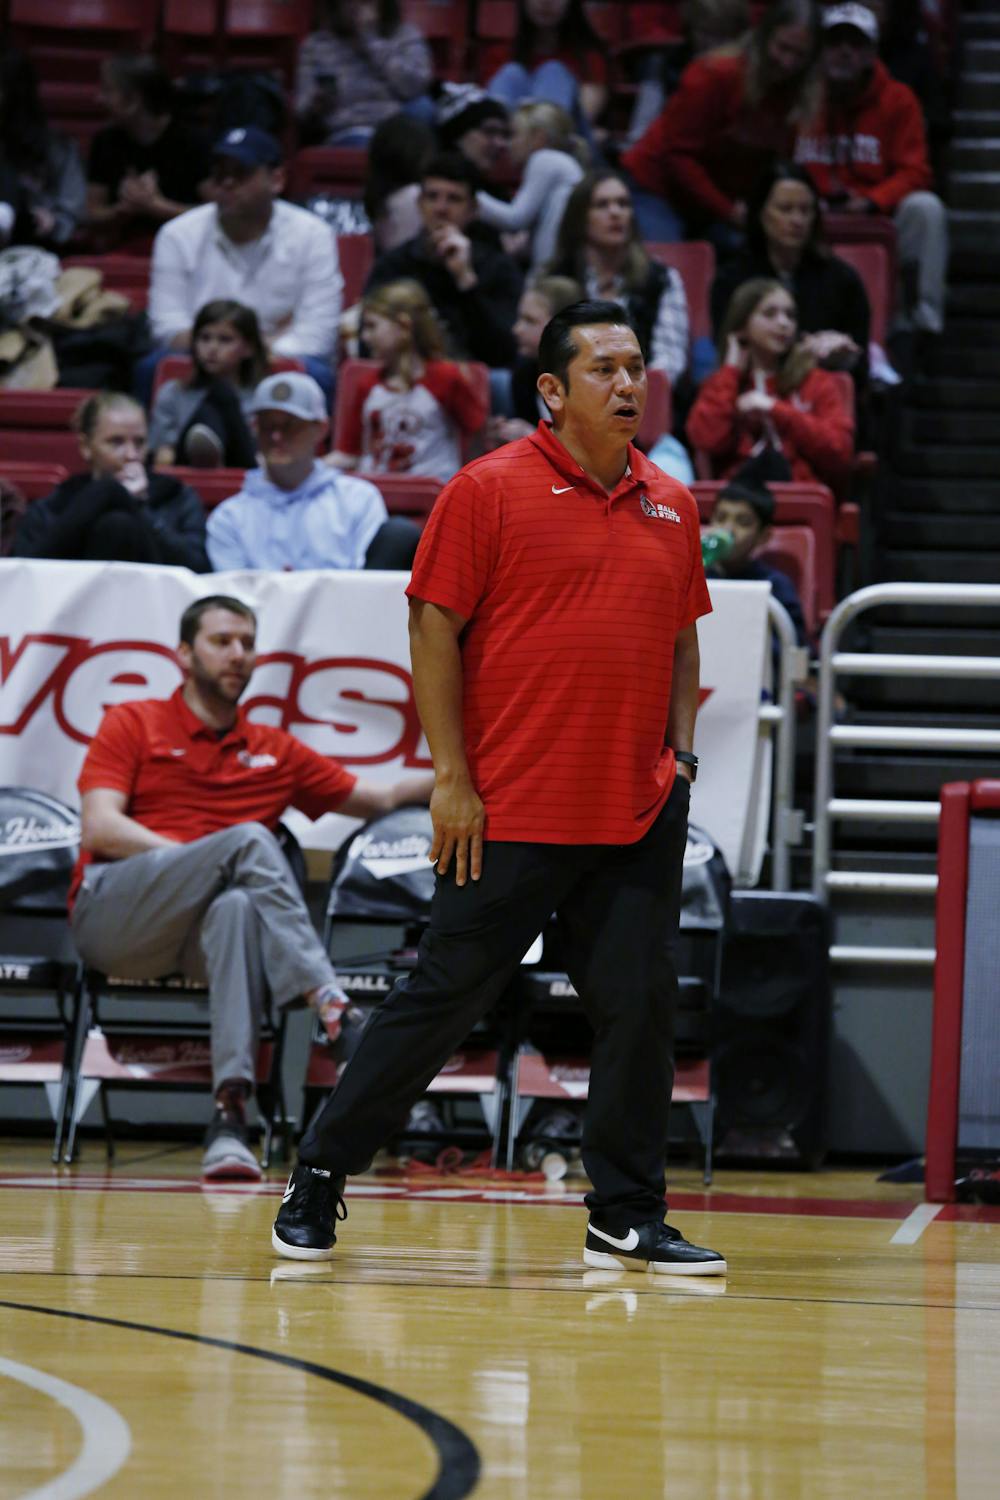 <p>Ball State men's volleyball Head Coach Donan Cruz speaks to the team from the bench area against Sacred Heart University on Jan. 28, 2023 at Worthen Arena. The Cardinals won against the Pioneers 3-0. Mya Cataline, DN</p>